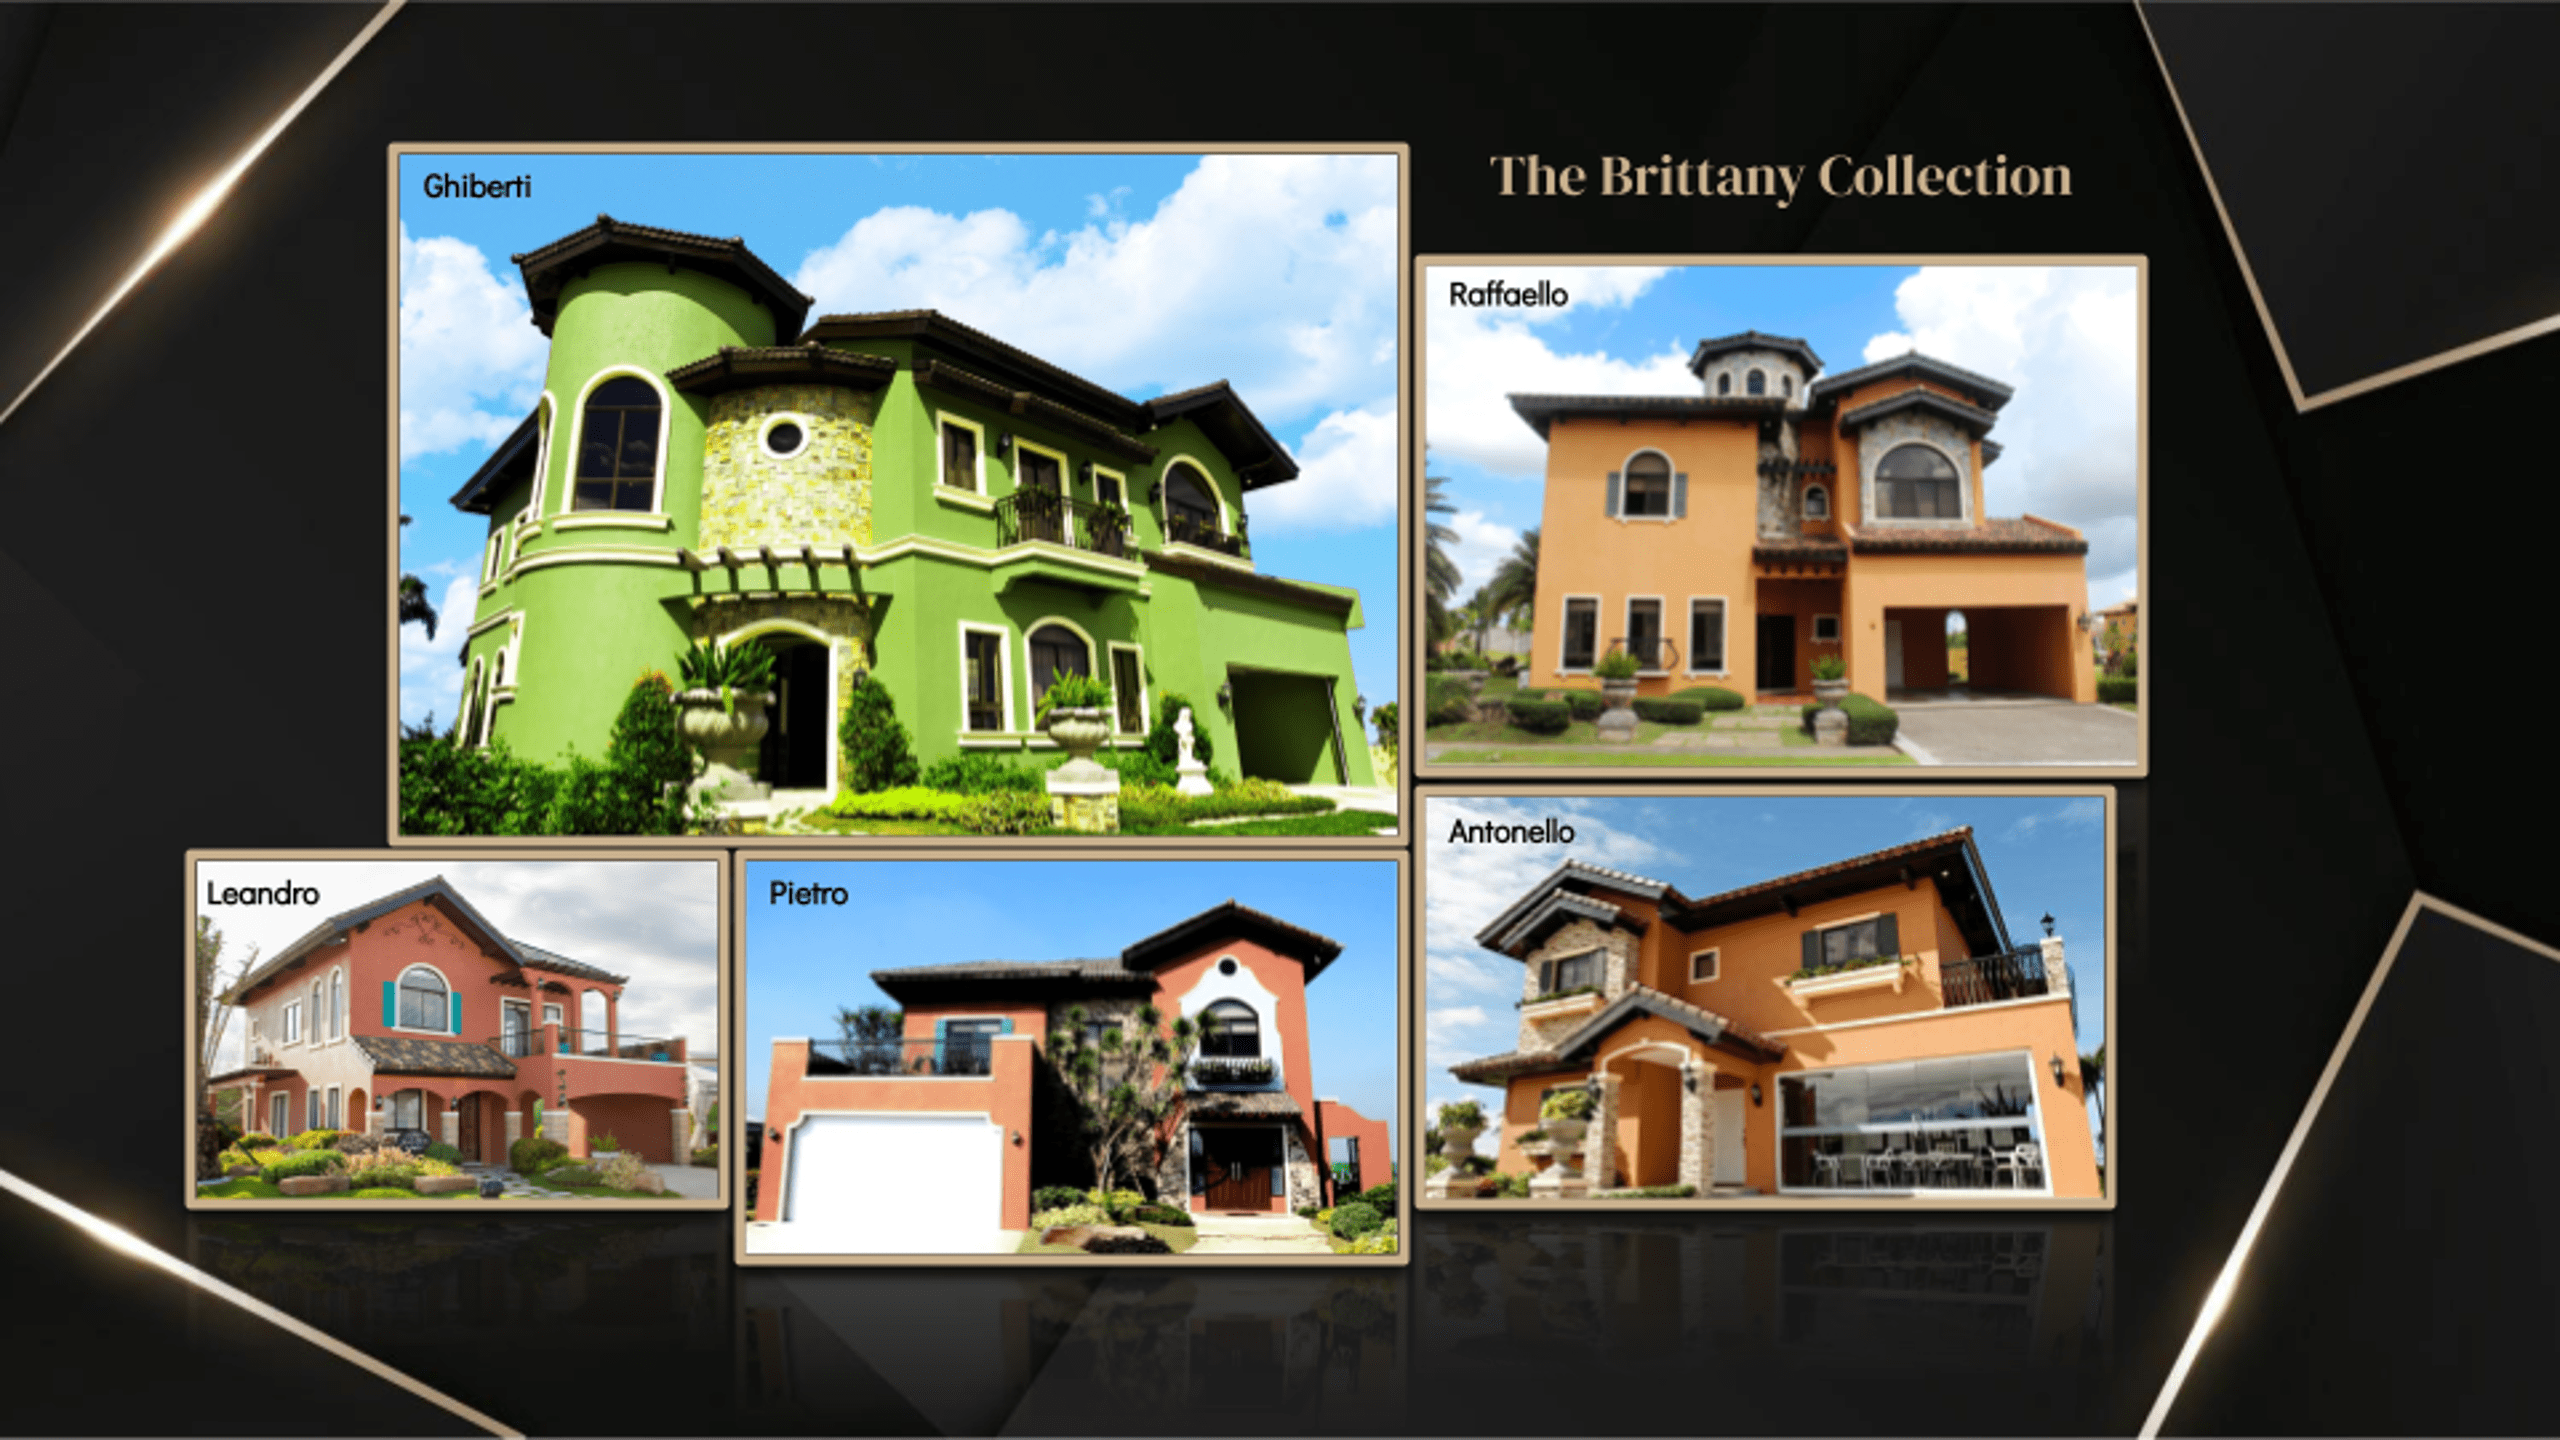 Portofino Heighs Luxury House Models | Photo from Brittany Corporation Website